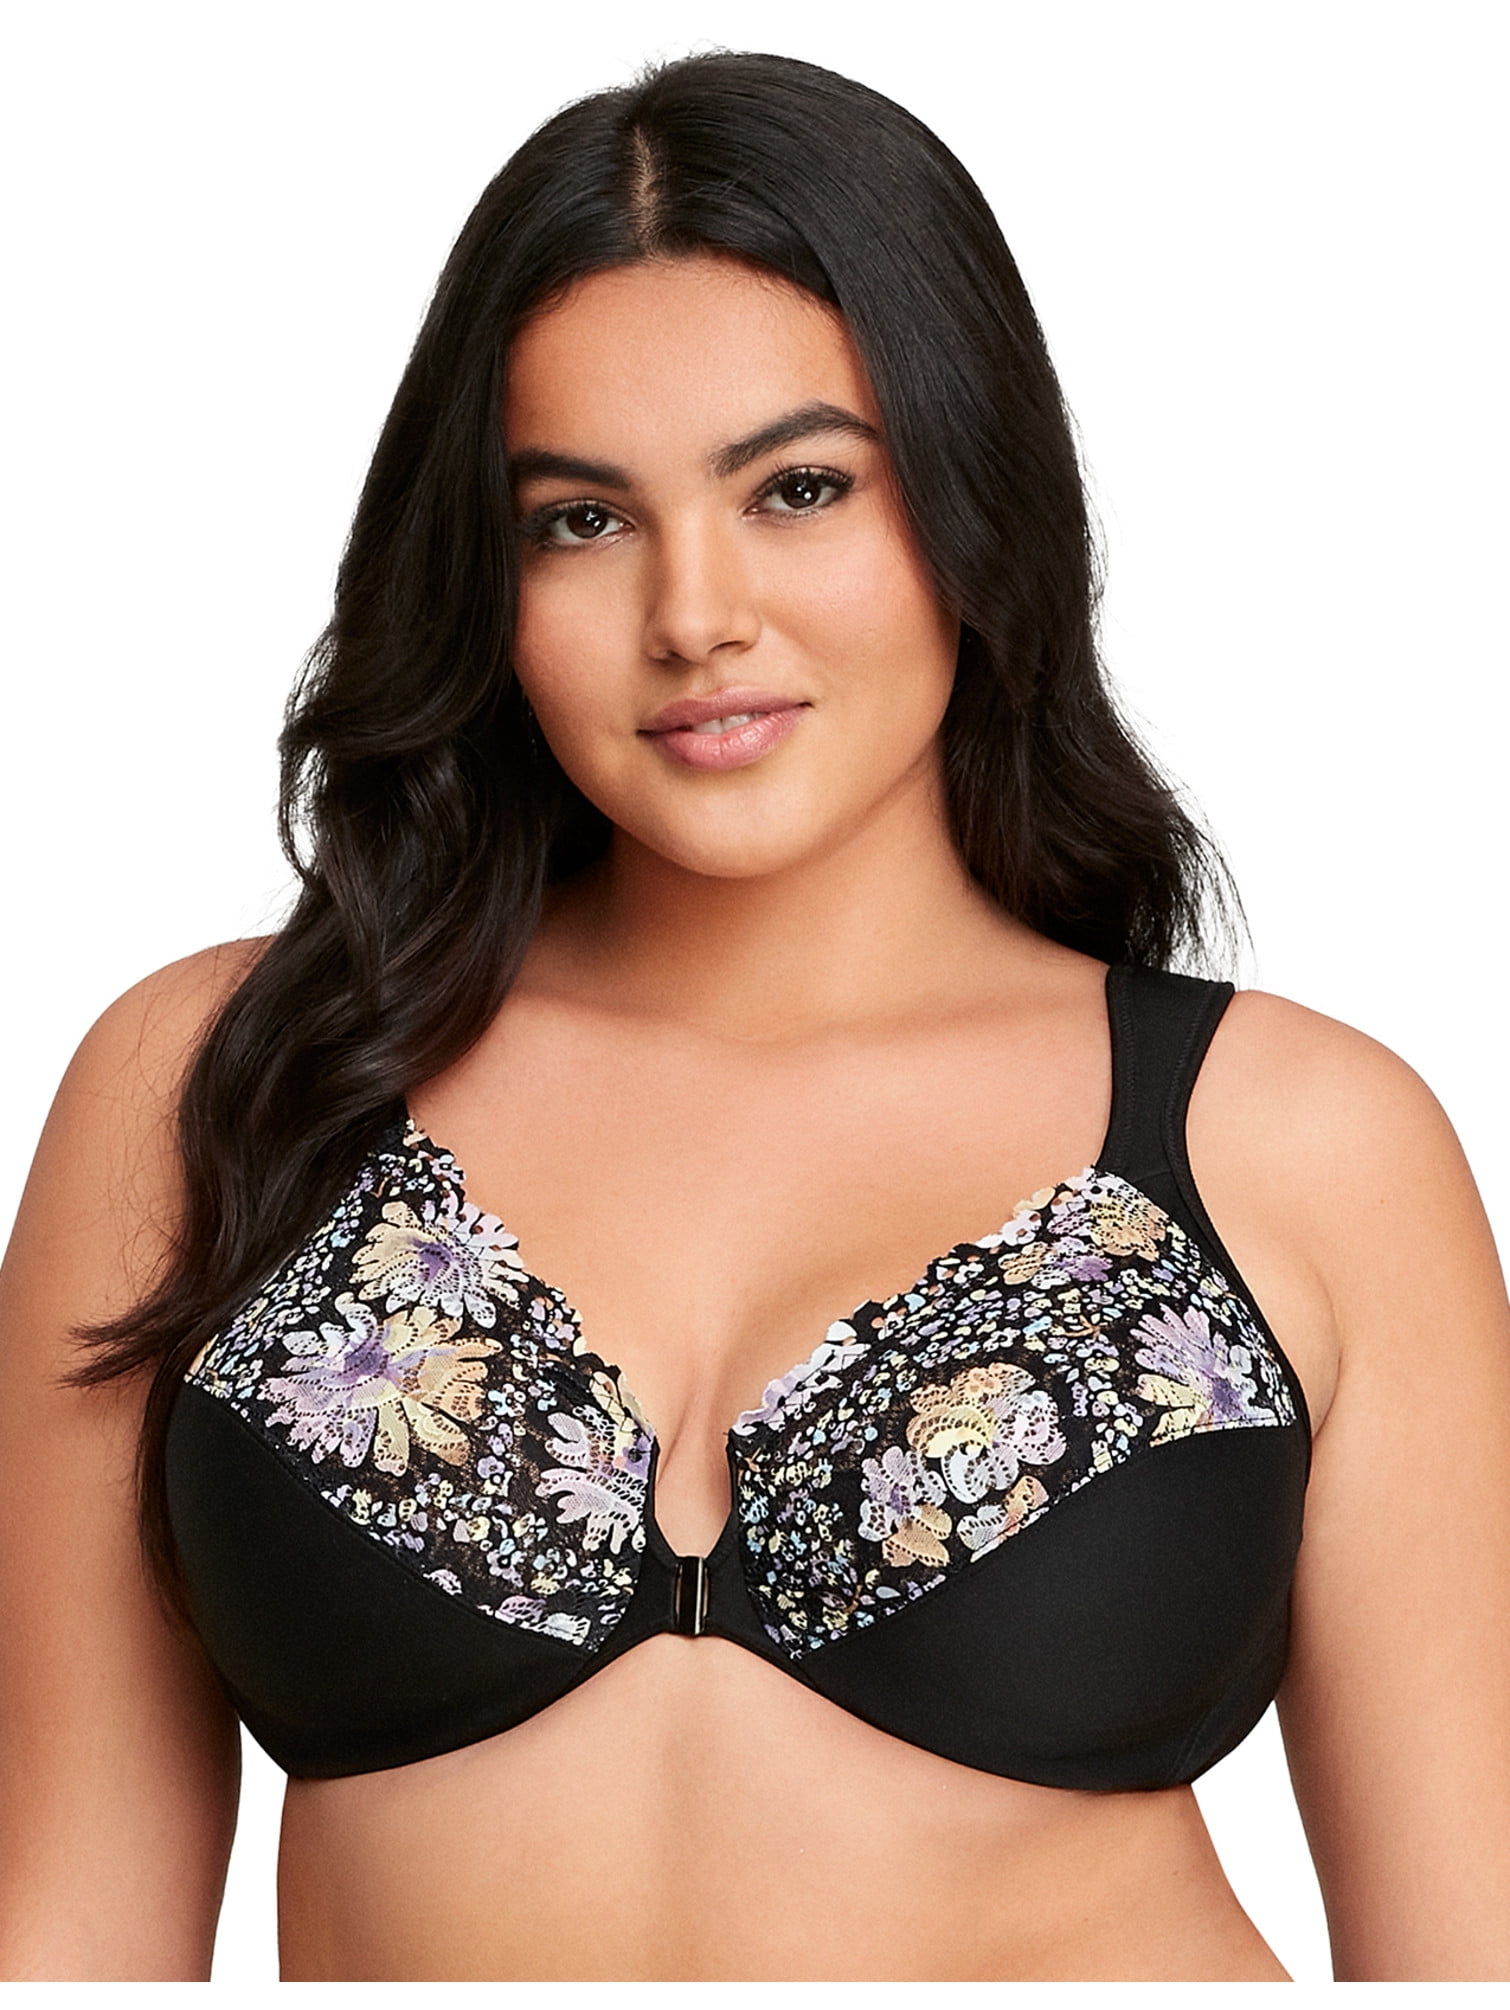 Glamorise Full Figure Plus Size MagicLift Front-Closure Support Bra  Wirefree #1200